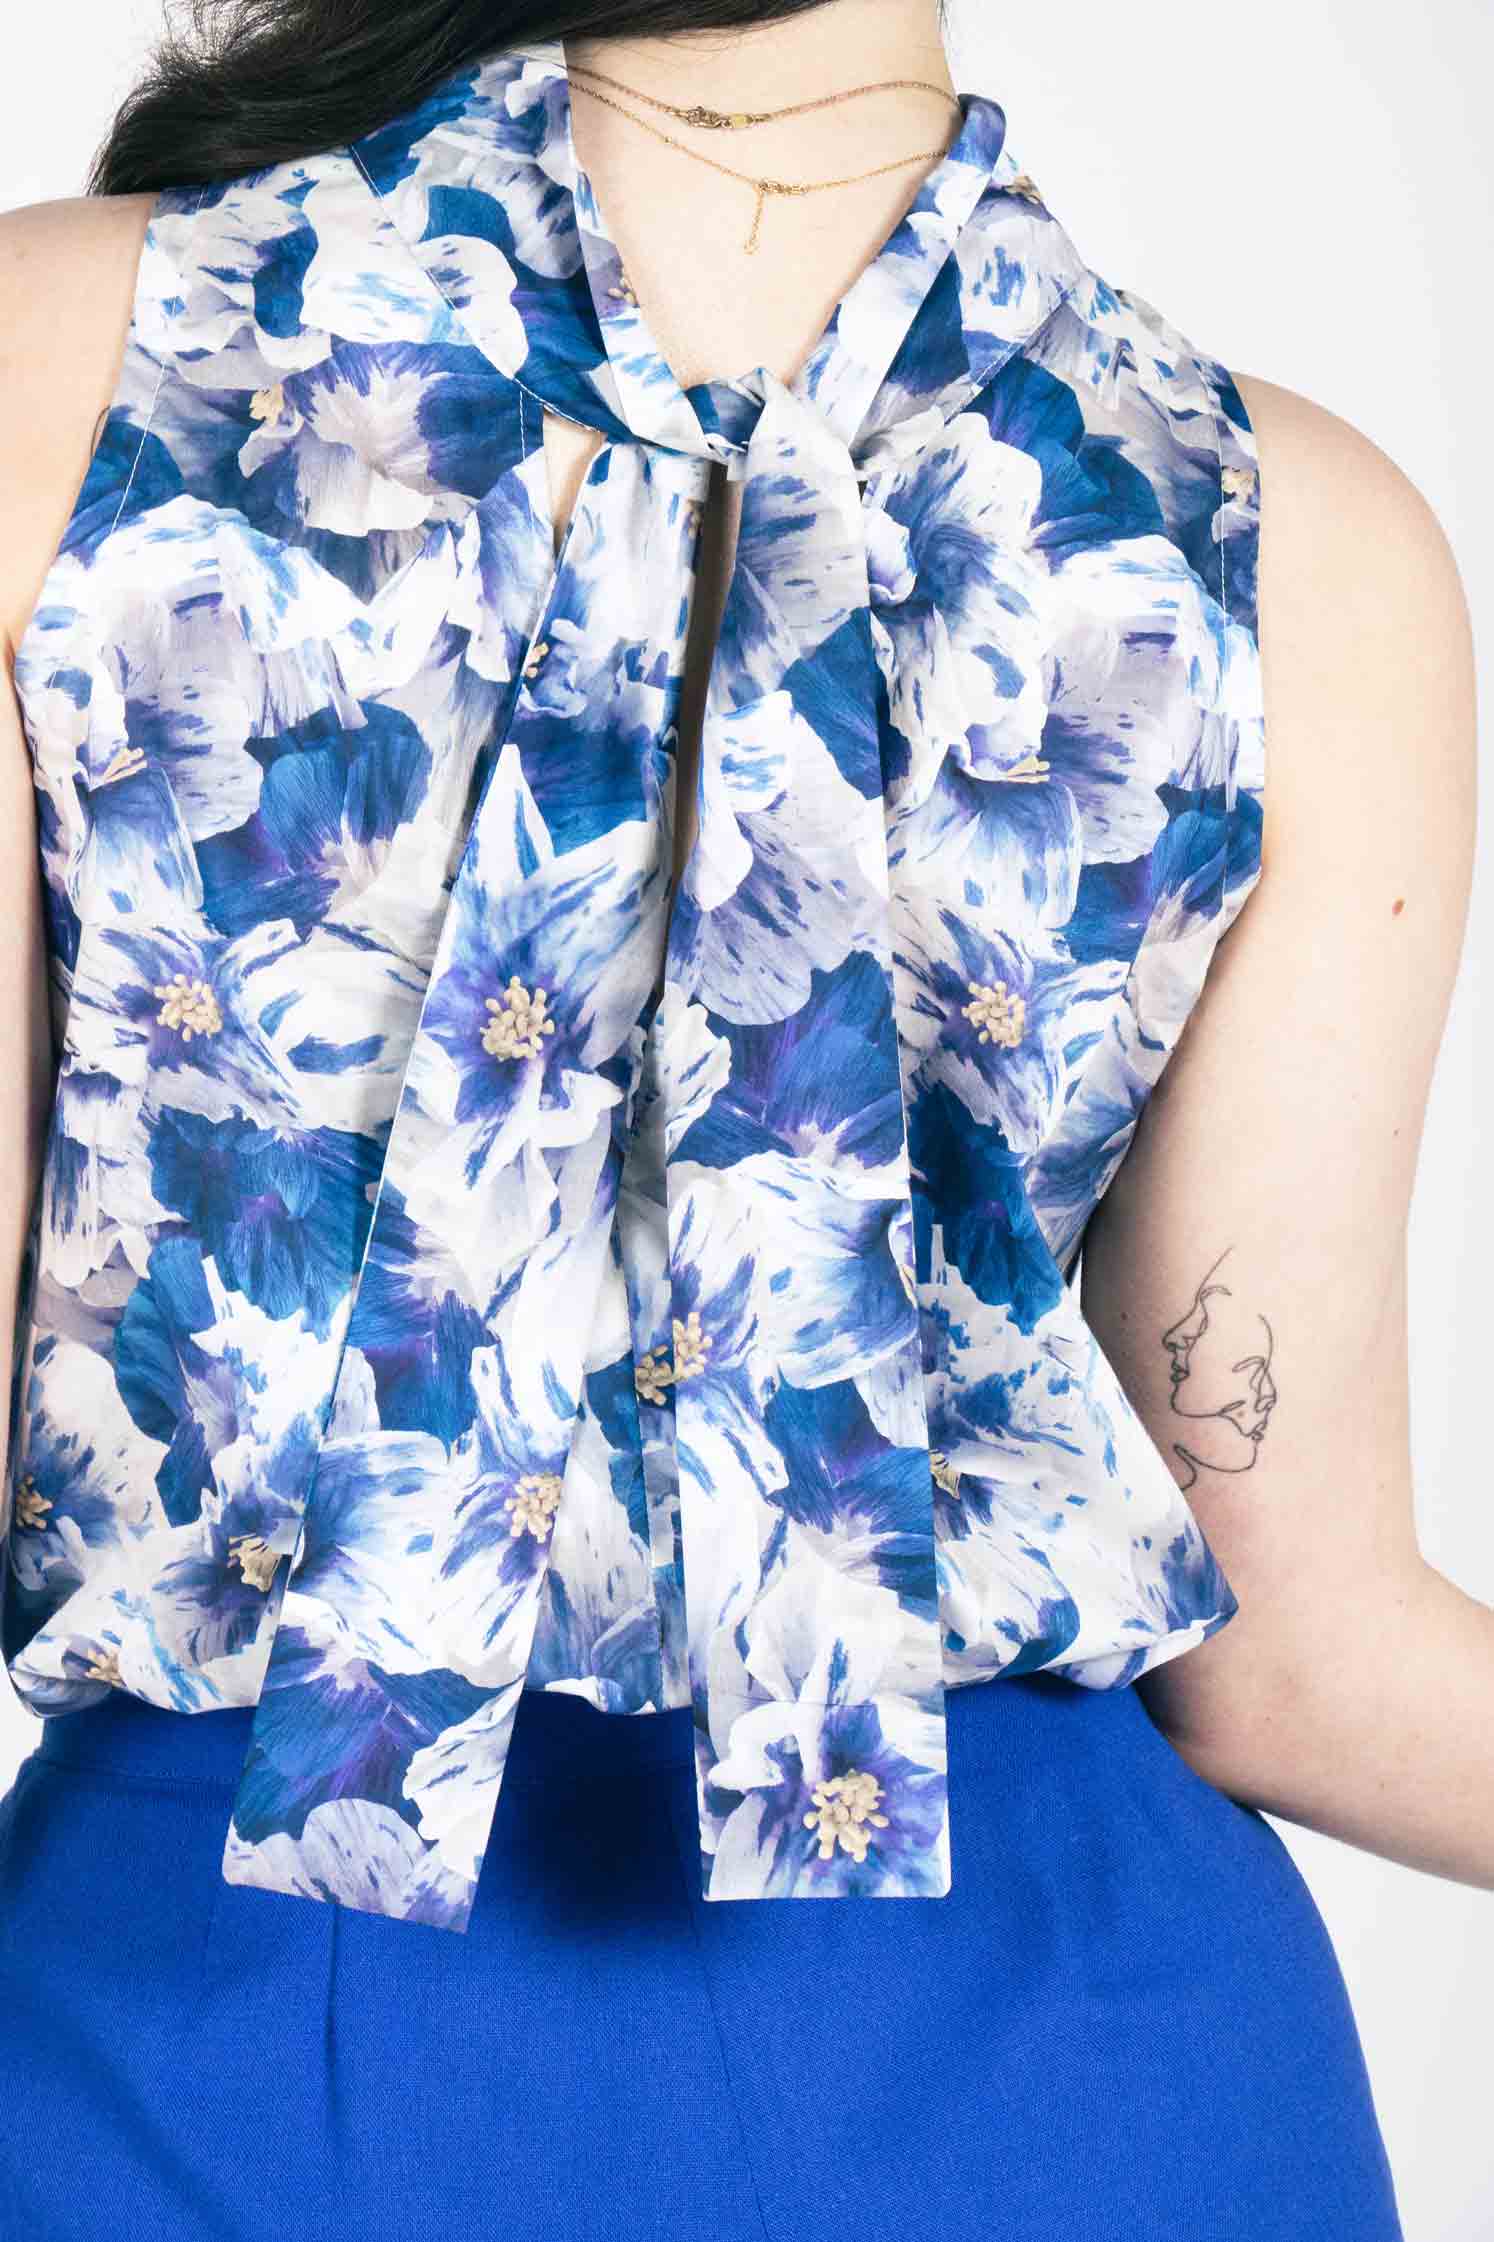 reversible floral top with high neck and pussy cat bow neck tie.